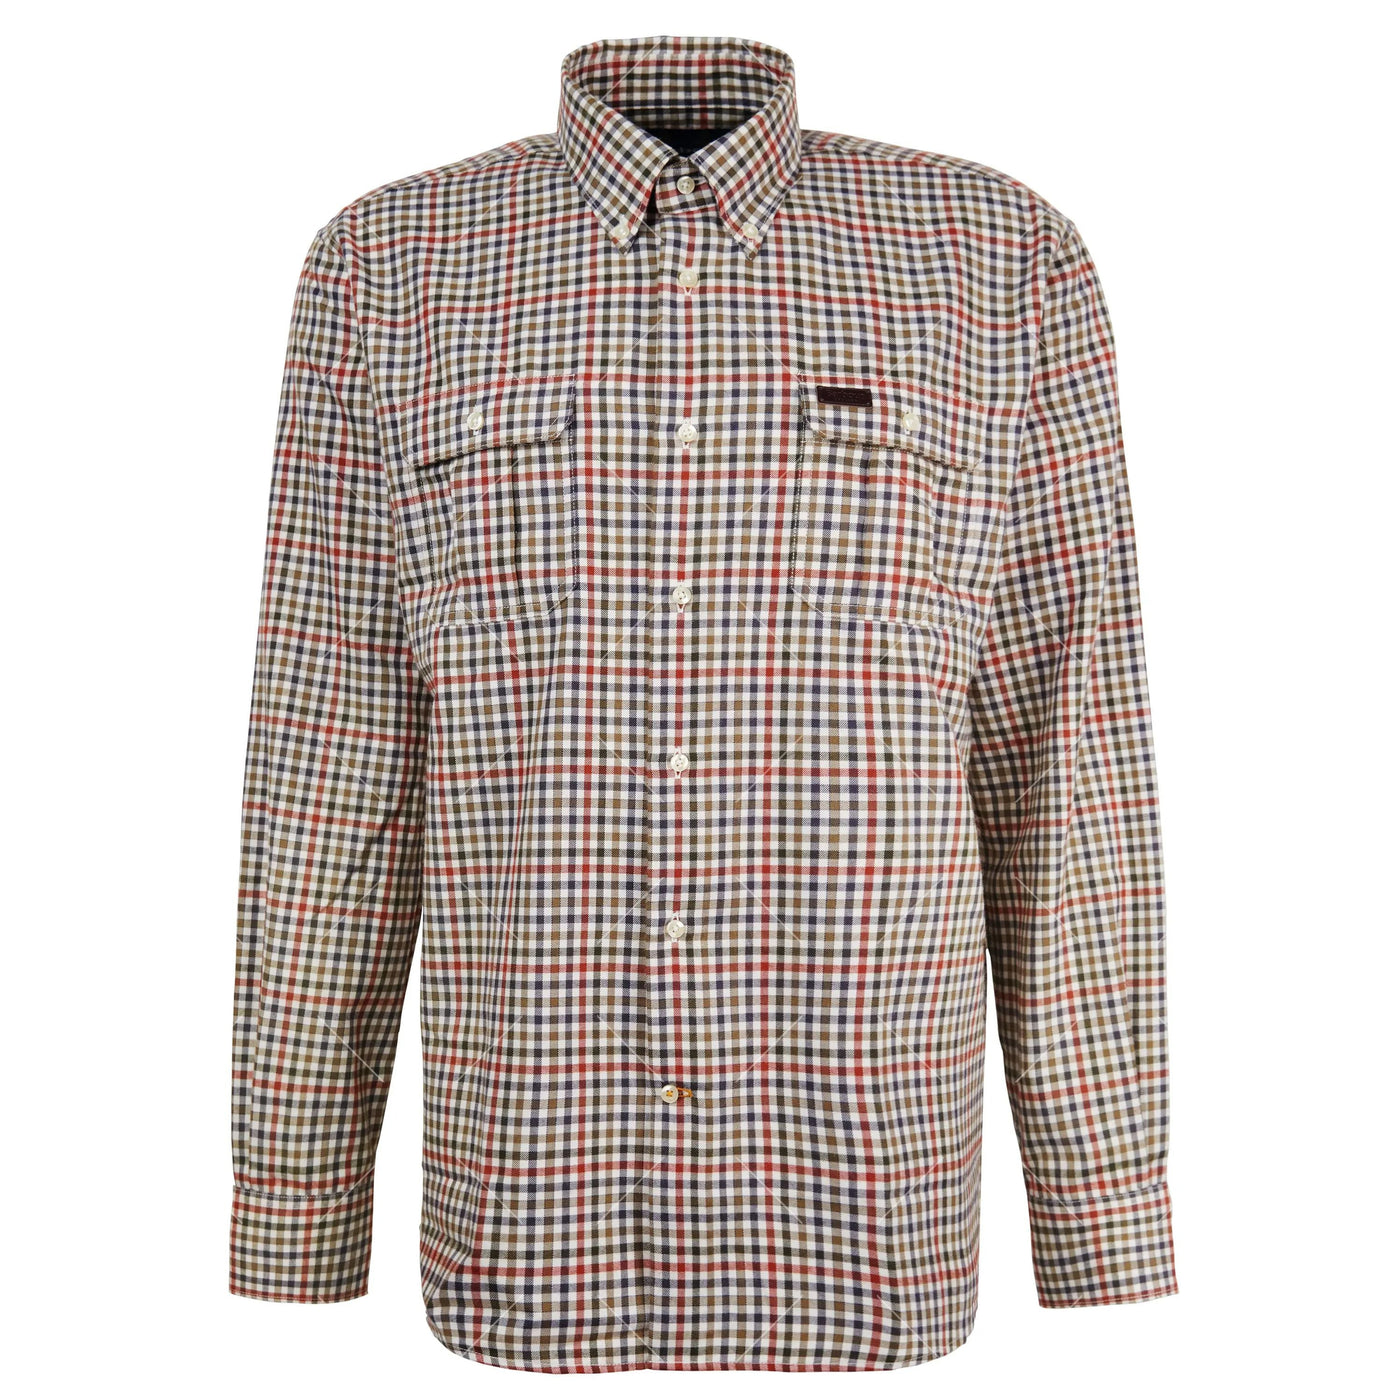 Barbour Foss Tailored Shirt-OLIVE-S-Kevin's Fine Outdoor Gear & Apparel